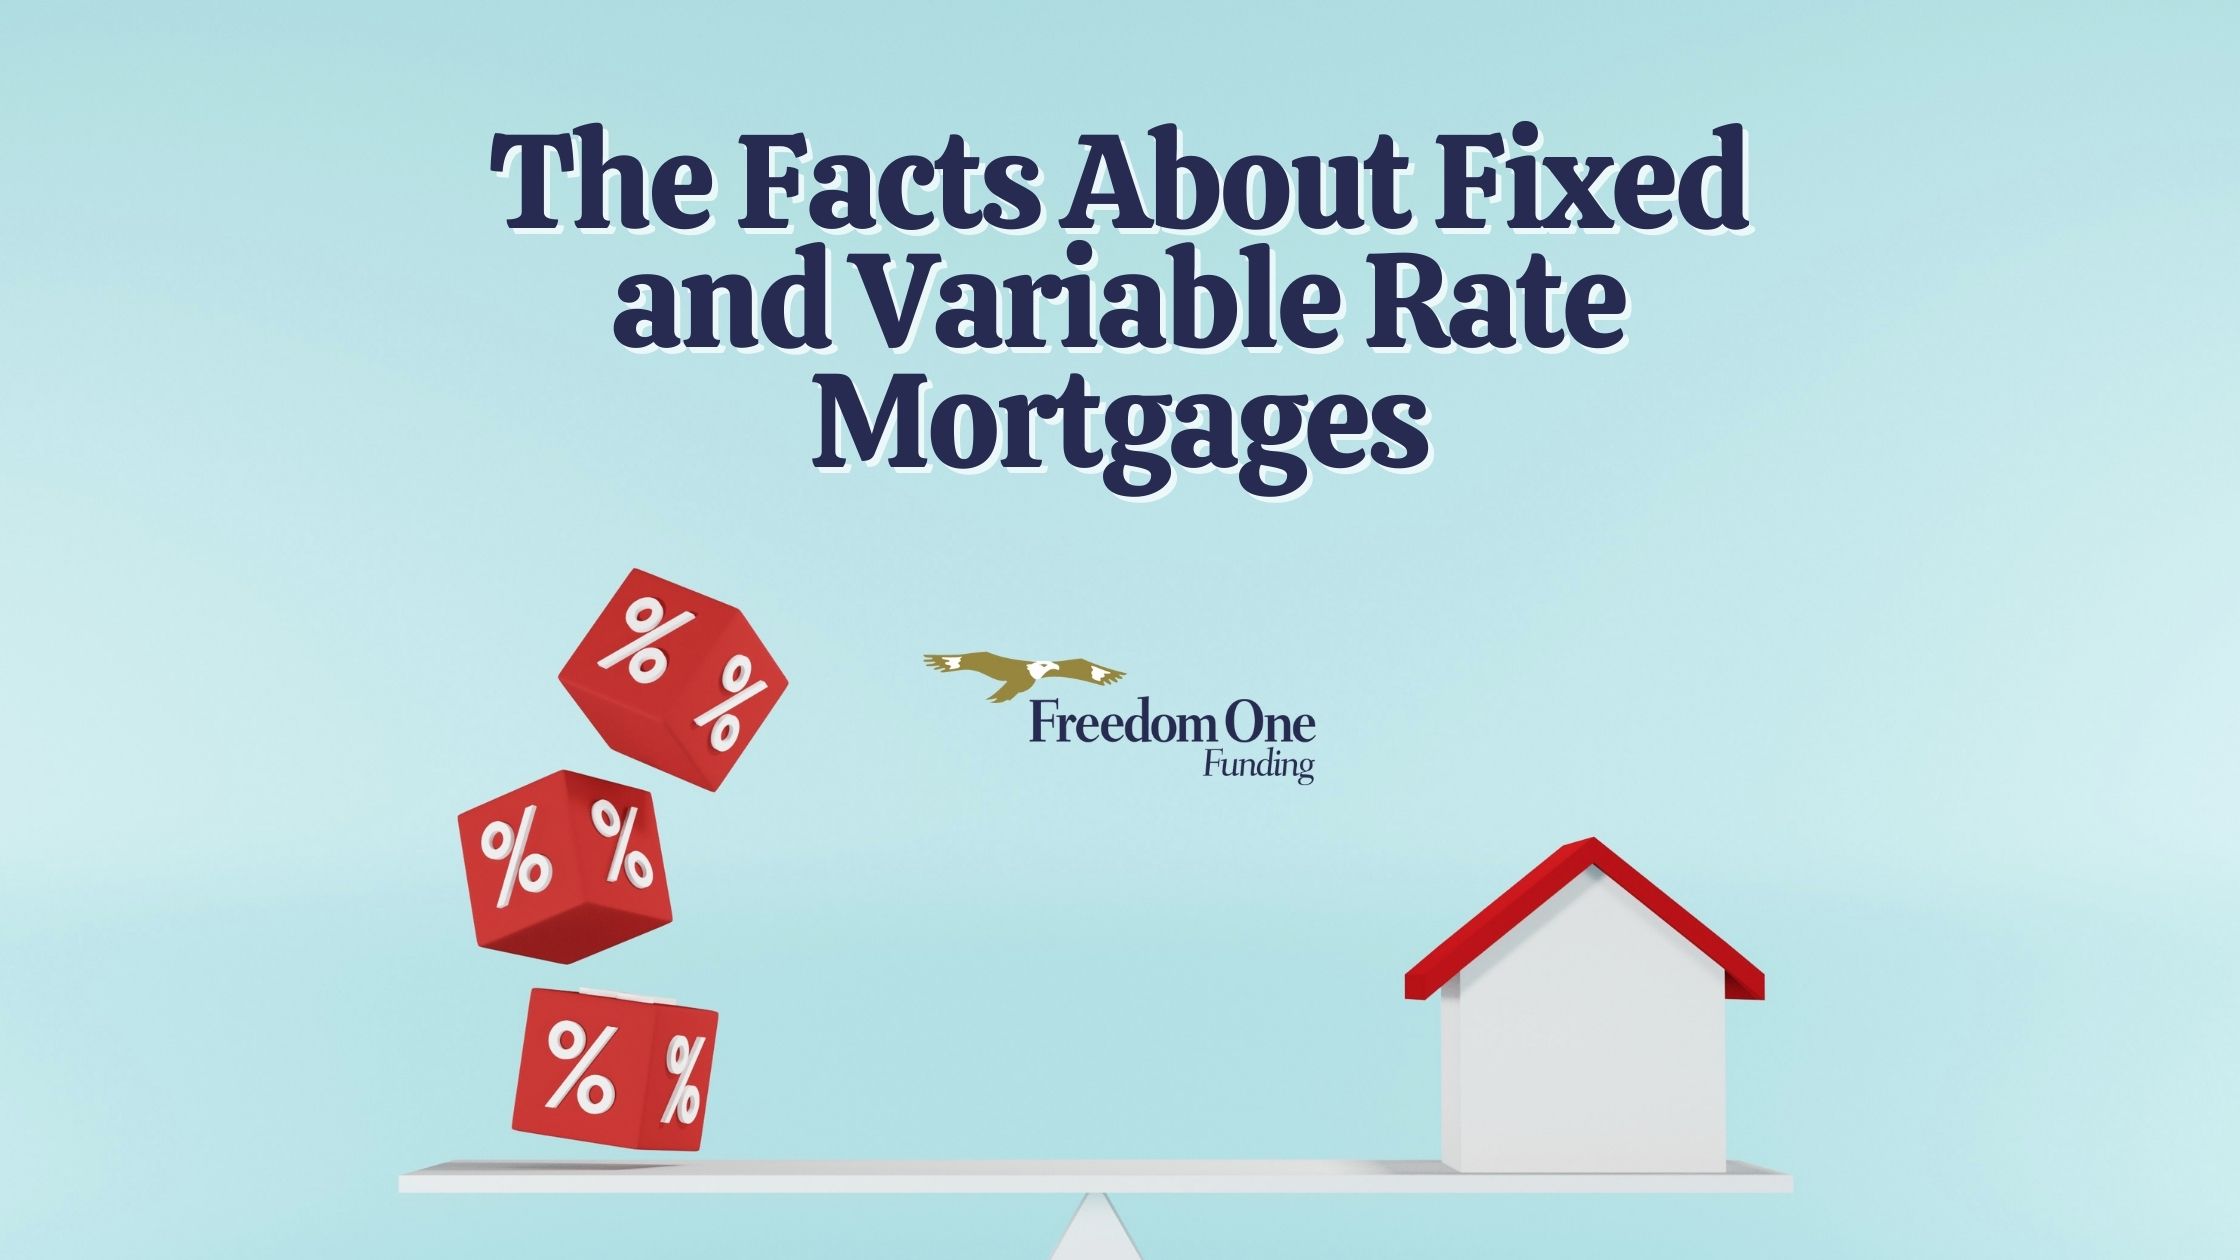 Fixed and Variable Rate Mortgages